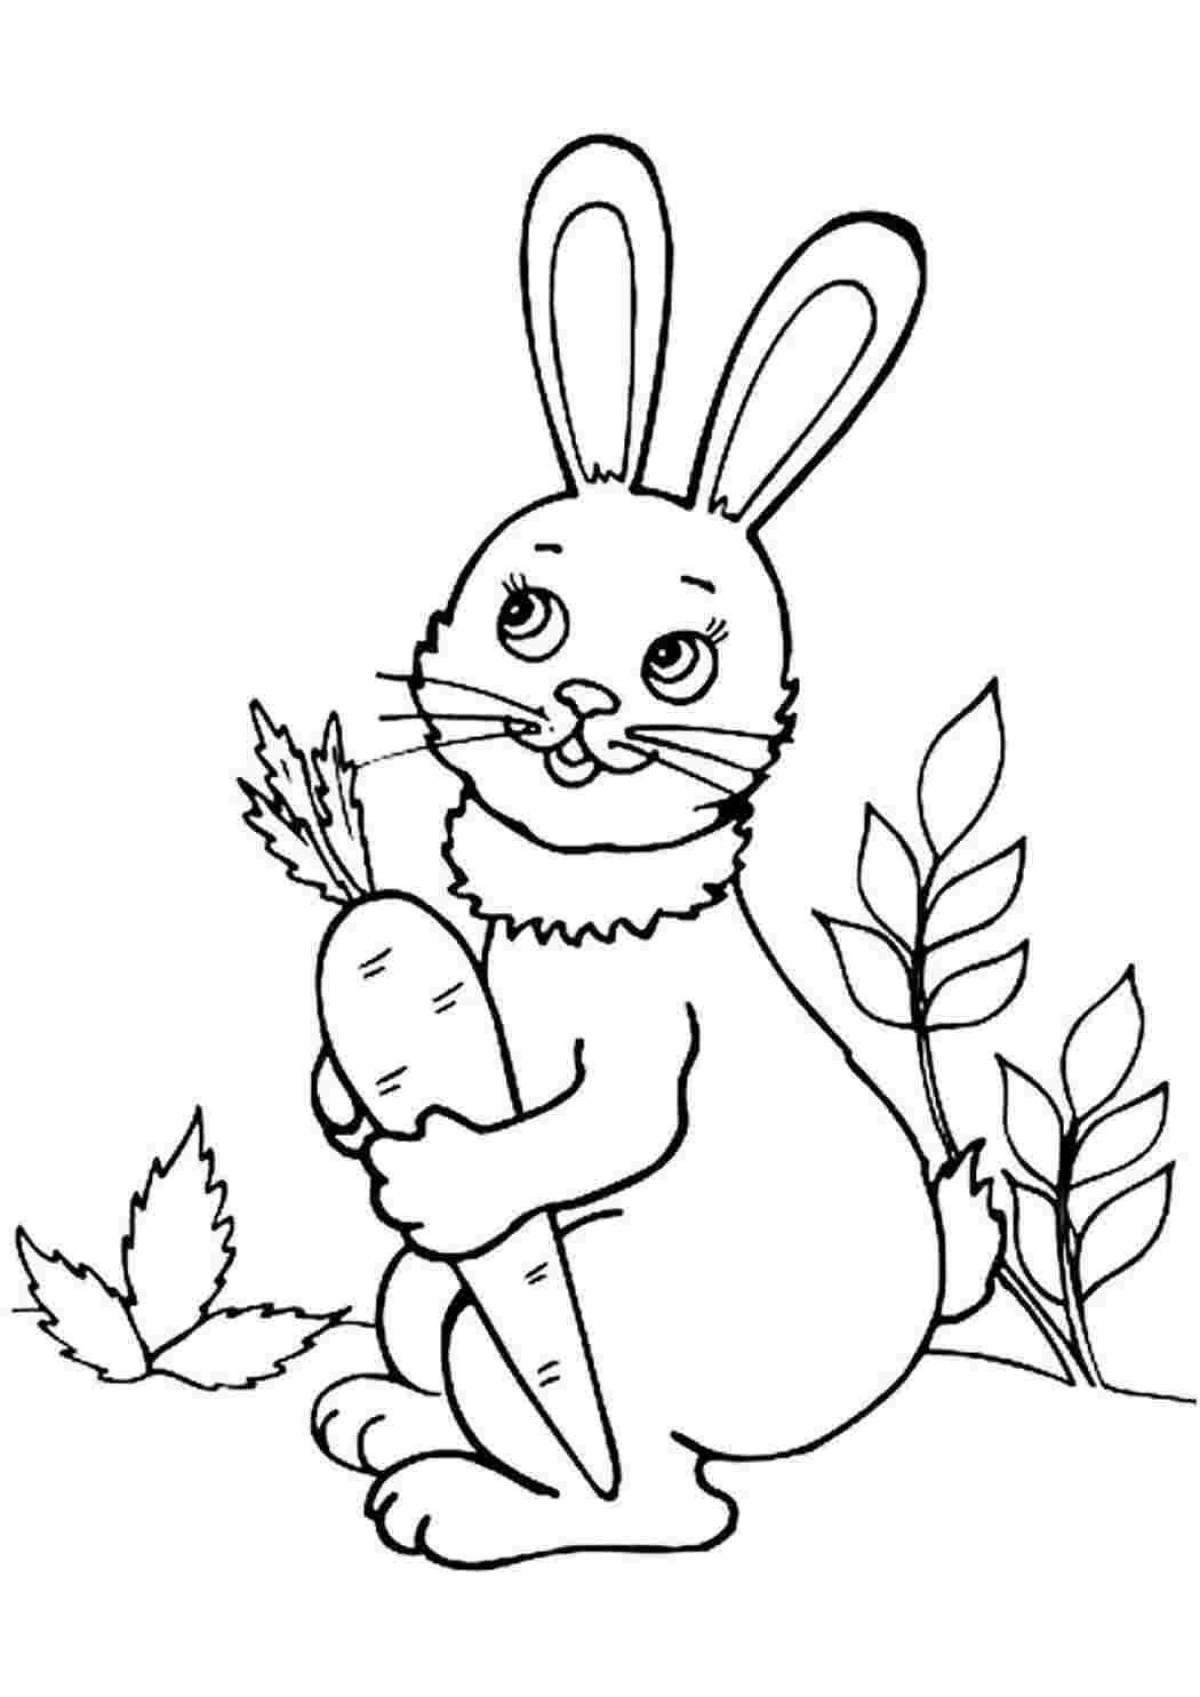 Soft coloring rabbit with print